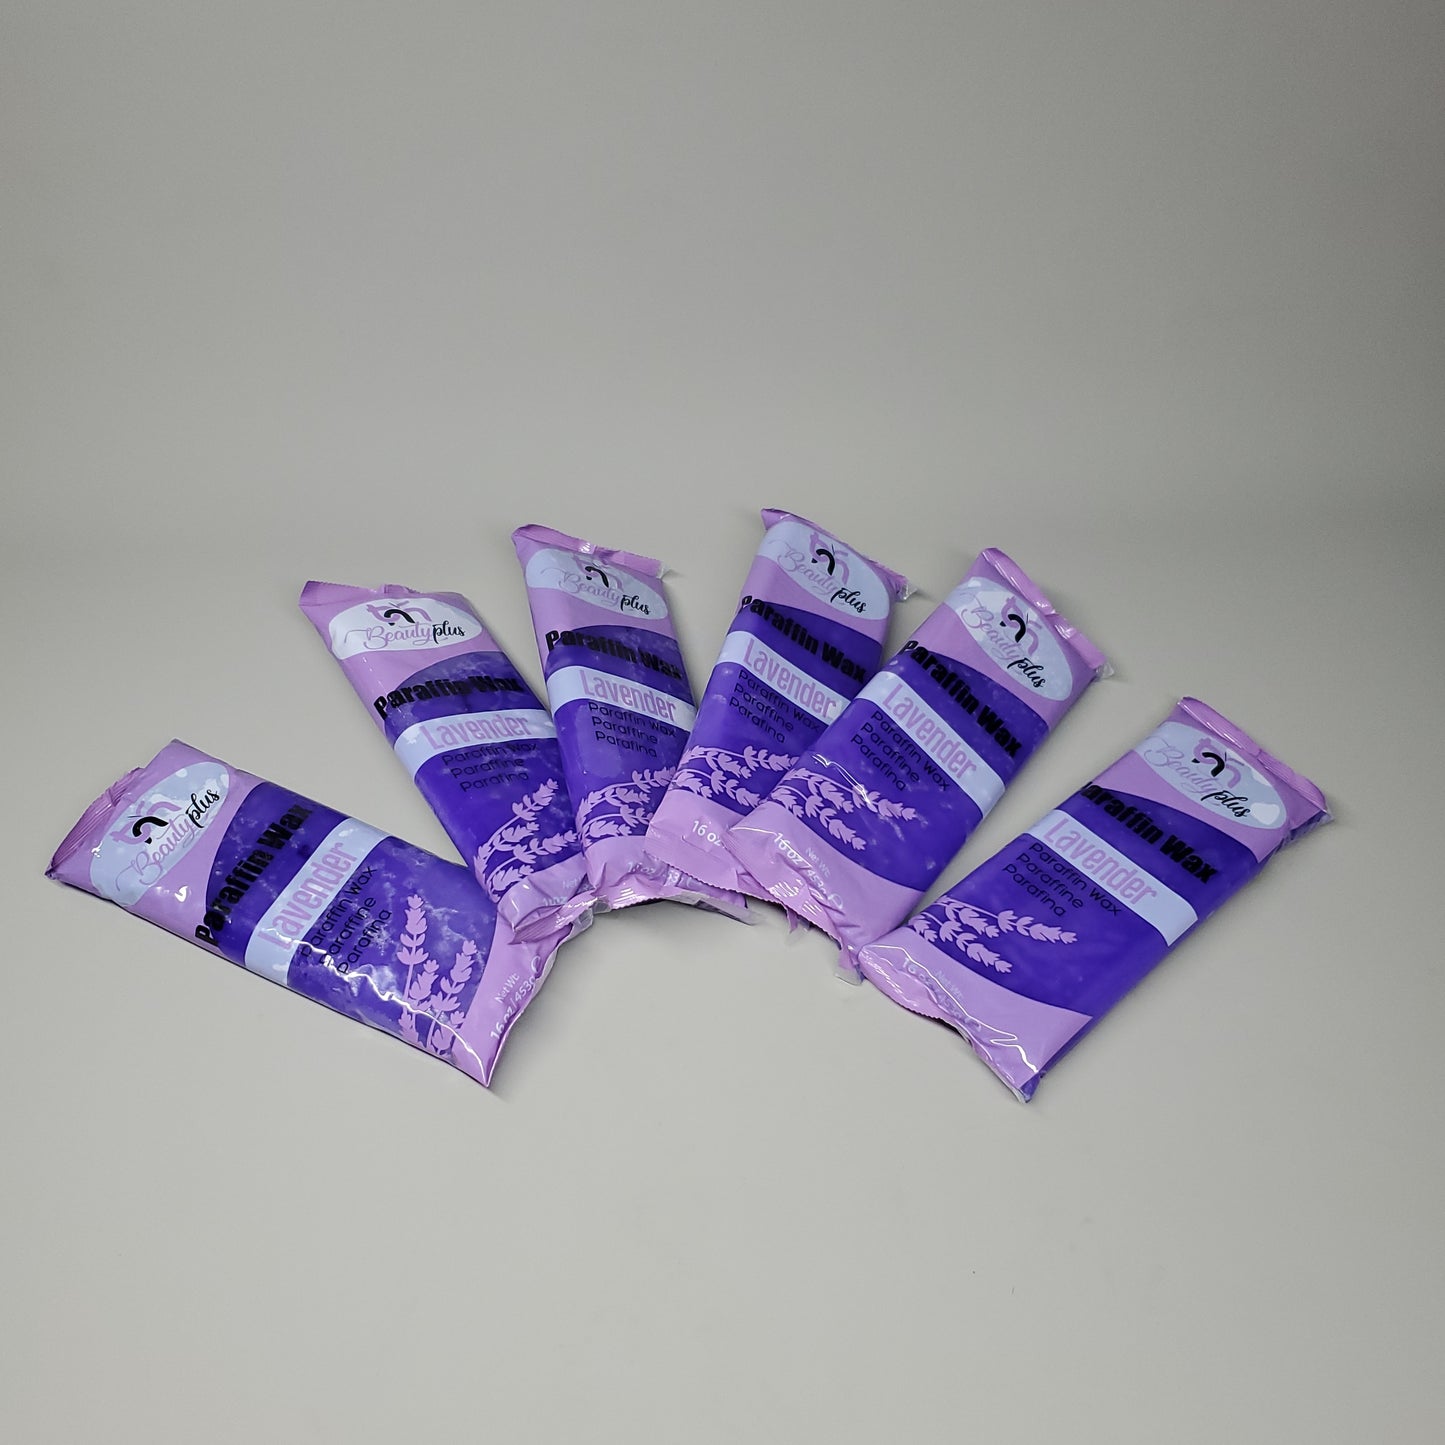 BEAUTY PLUS 6 Pack Of Paraffin Wax Refills Lavender 1 LBS  (New)